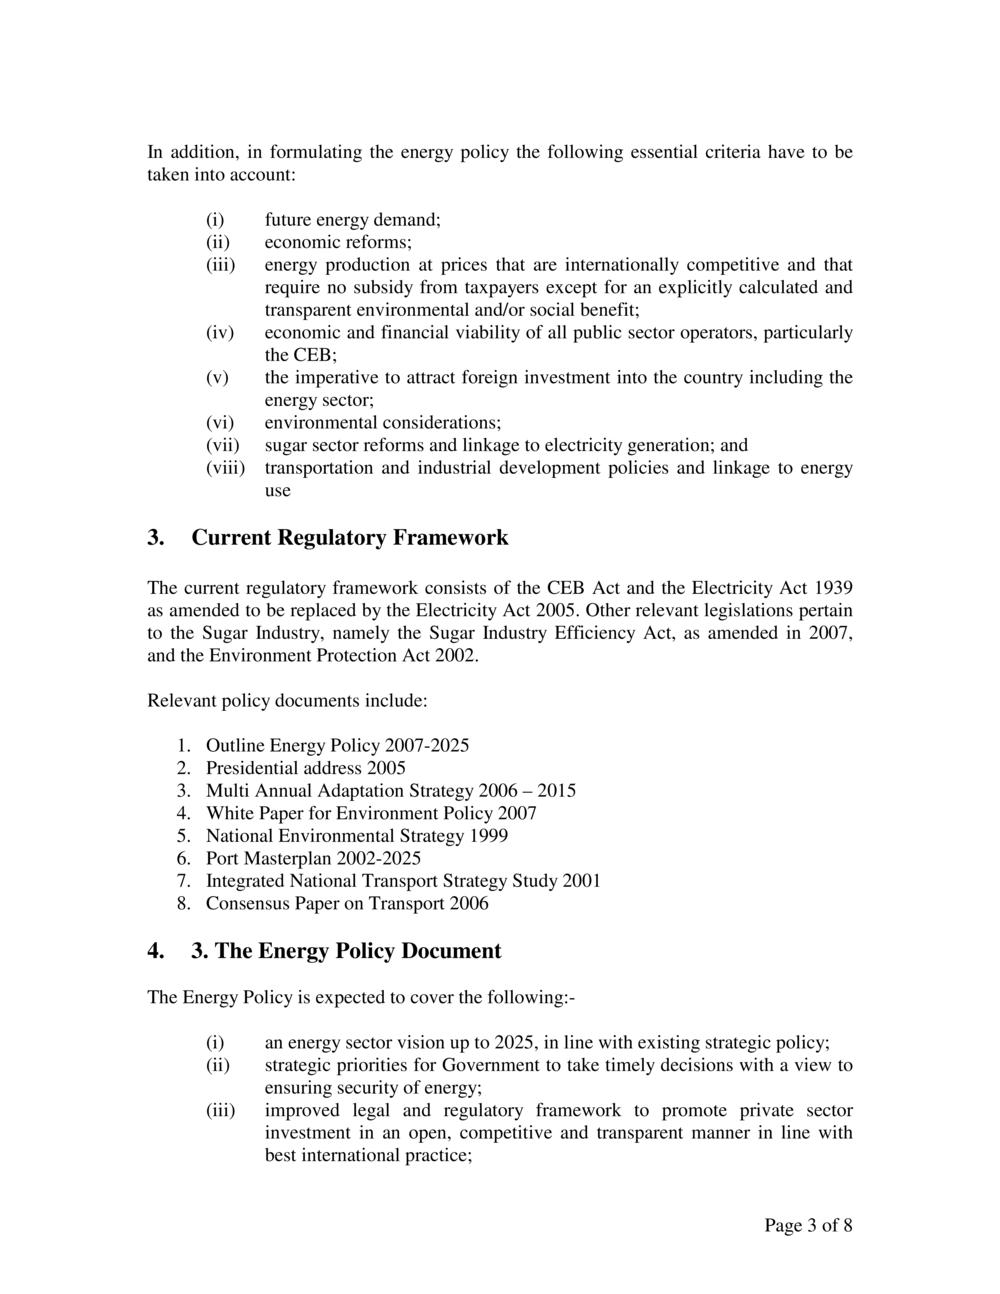 Outline of Energy Policy 2007-2025.